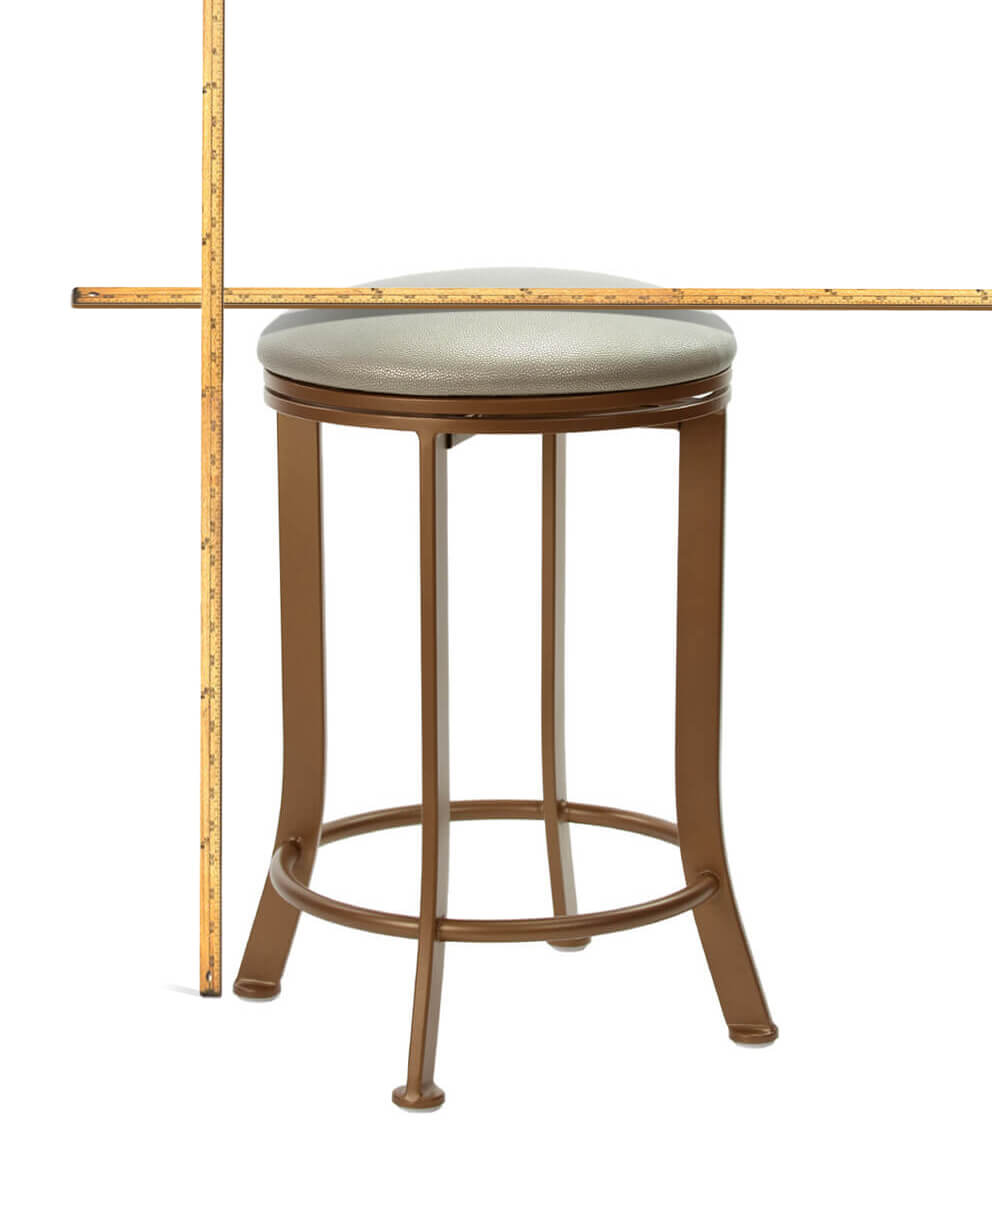 How to Measure Seat Height for a Bar Stool